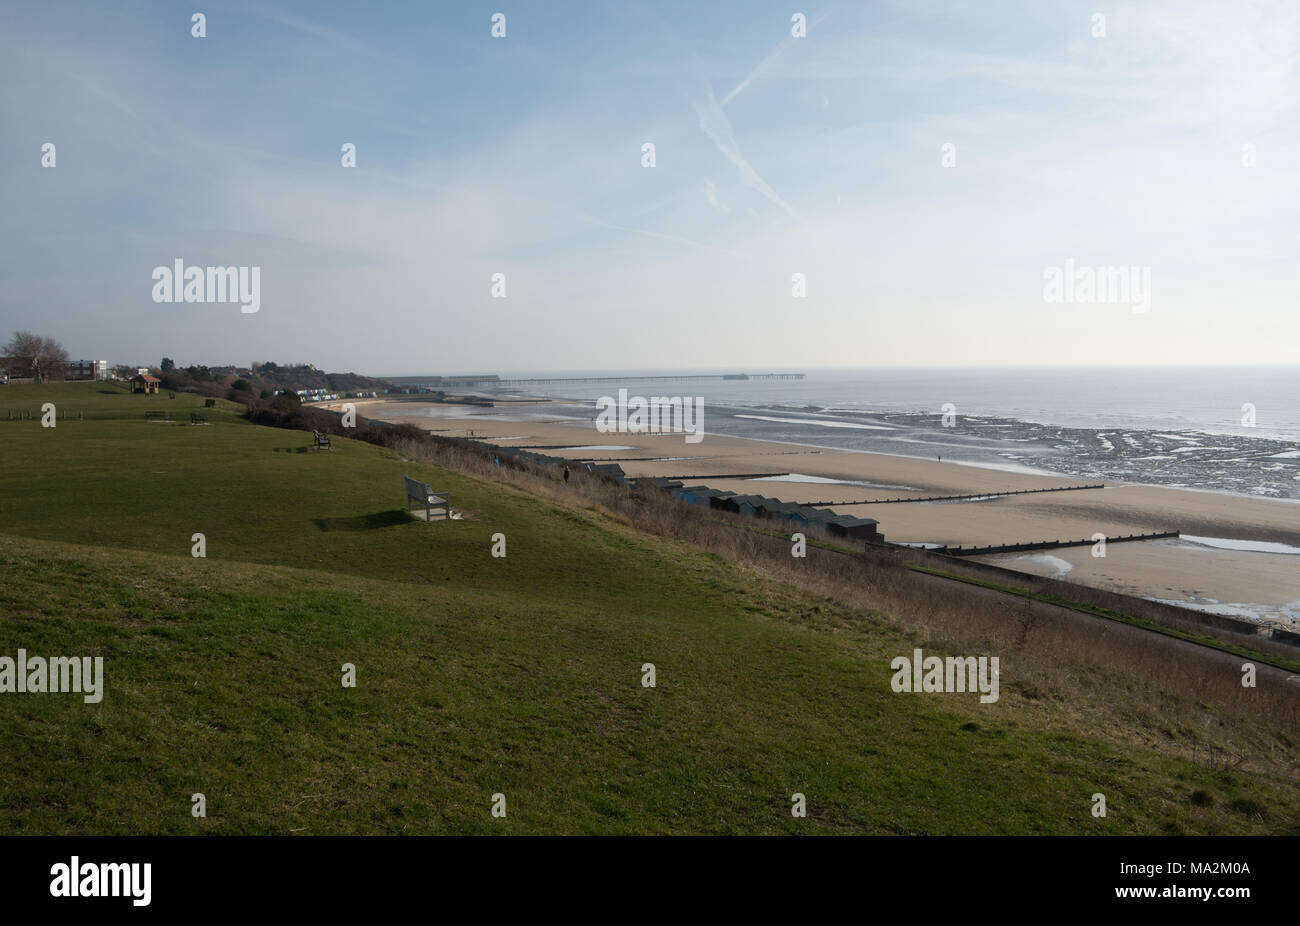 The view from the Greensward at Frinton-on-Sea looking towards Walton-on-the-Naze with a very low tide exposing all the beach below Stock Photo